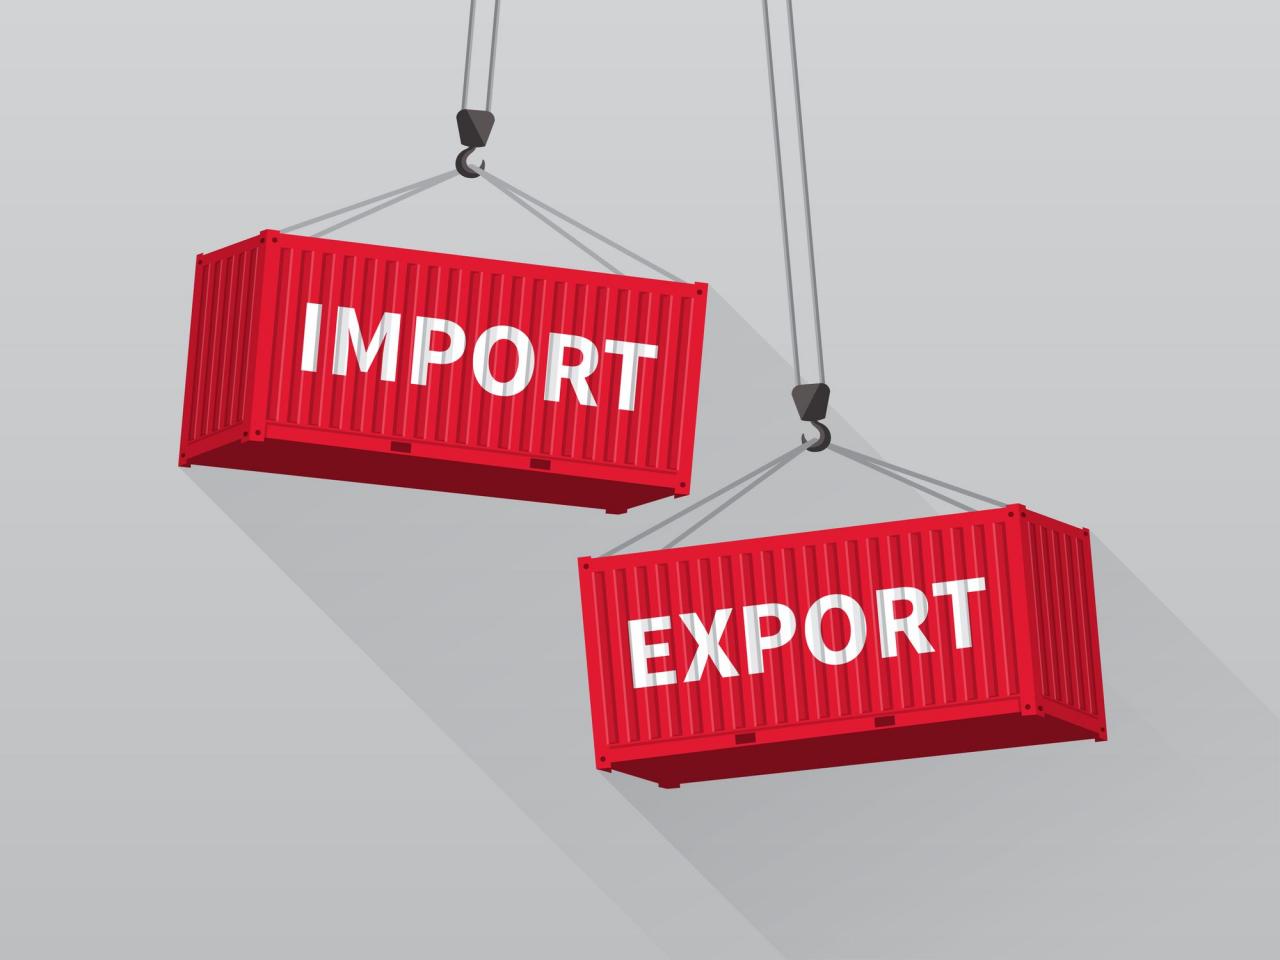 How to become an import export manager